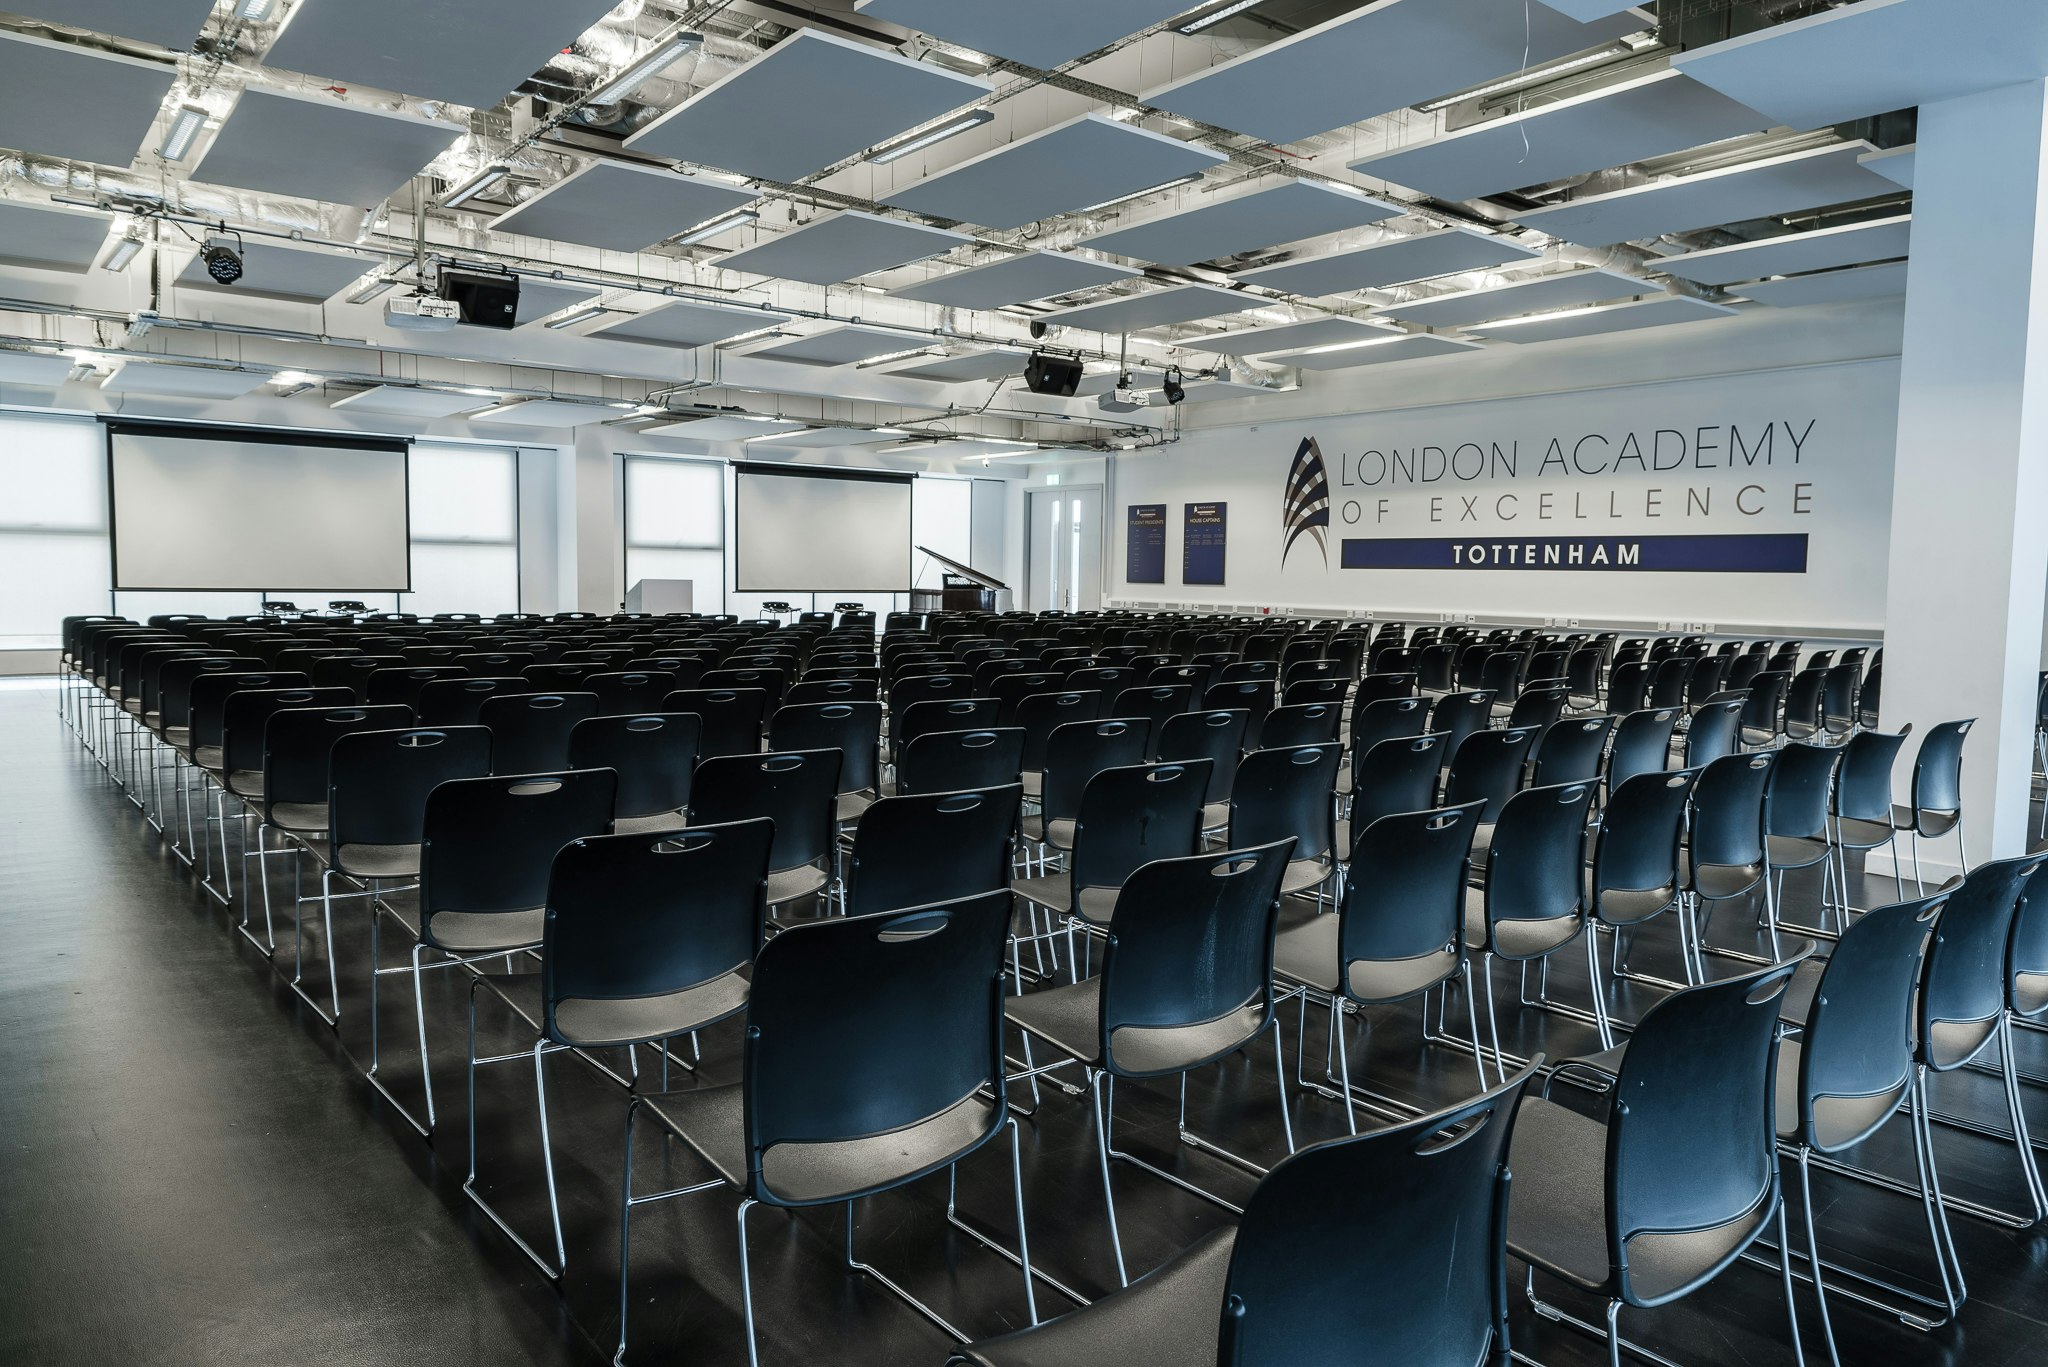 London Academy of Excellence Tottenham - Main hall image 3